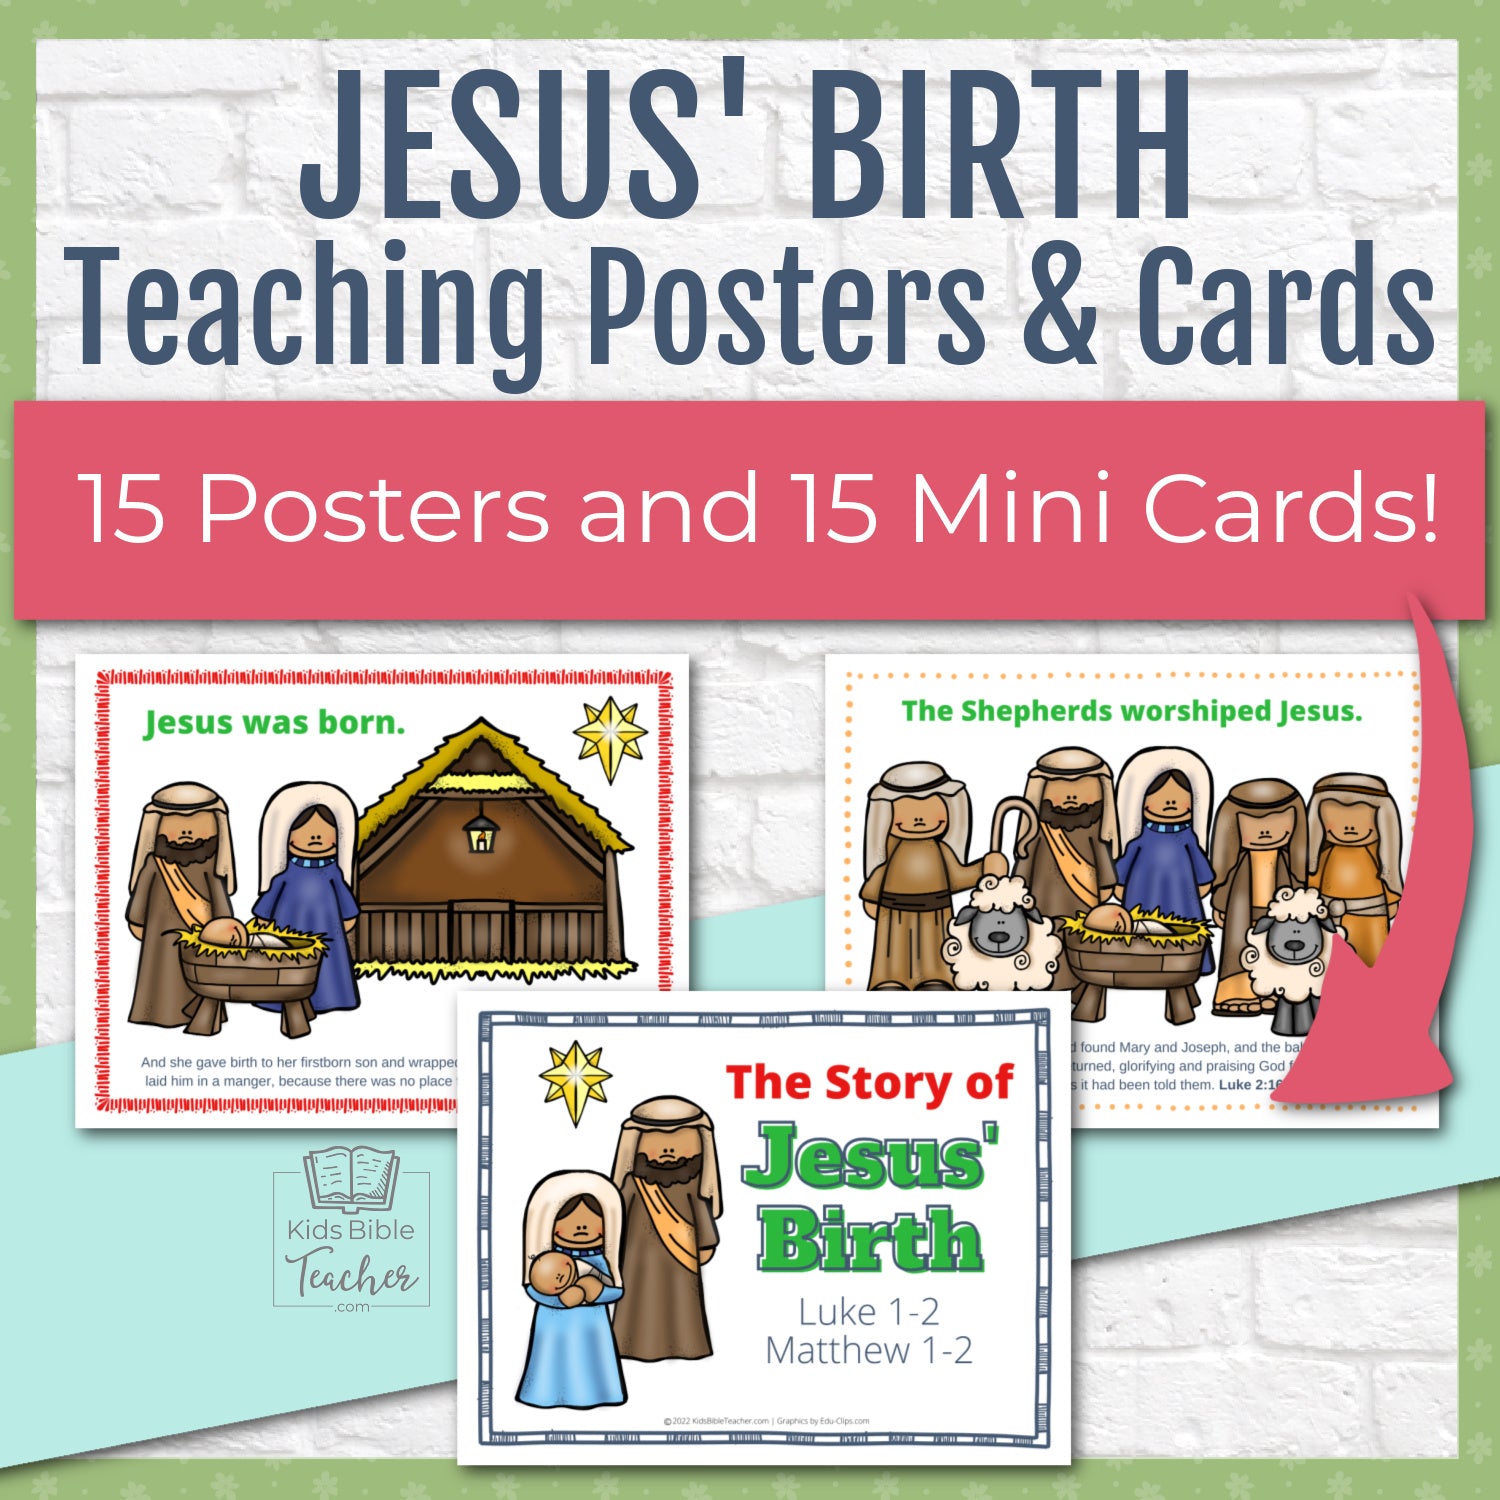 Jesus Birth Complete Nativity Bible Lesson Pack for the Advent Christmas Season